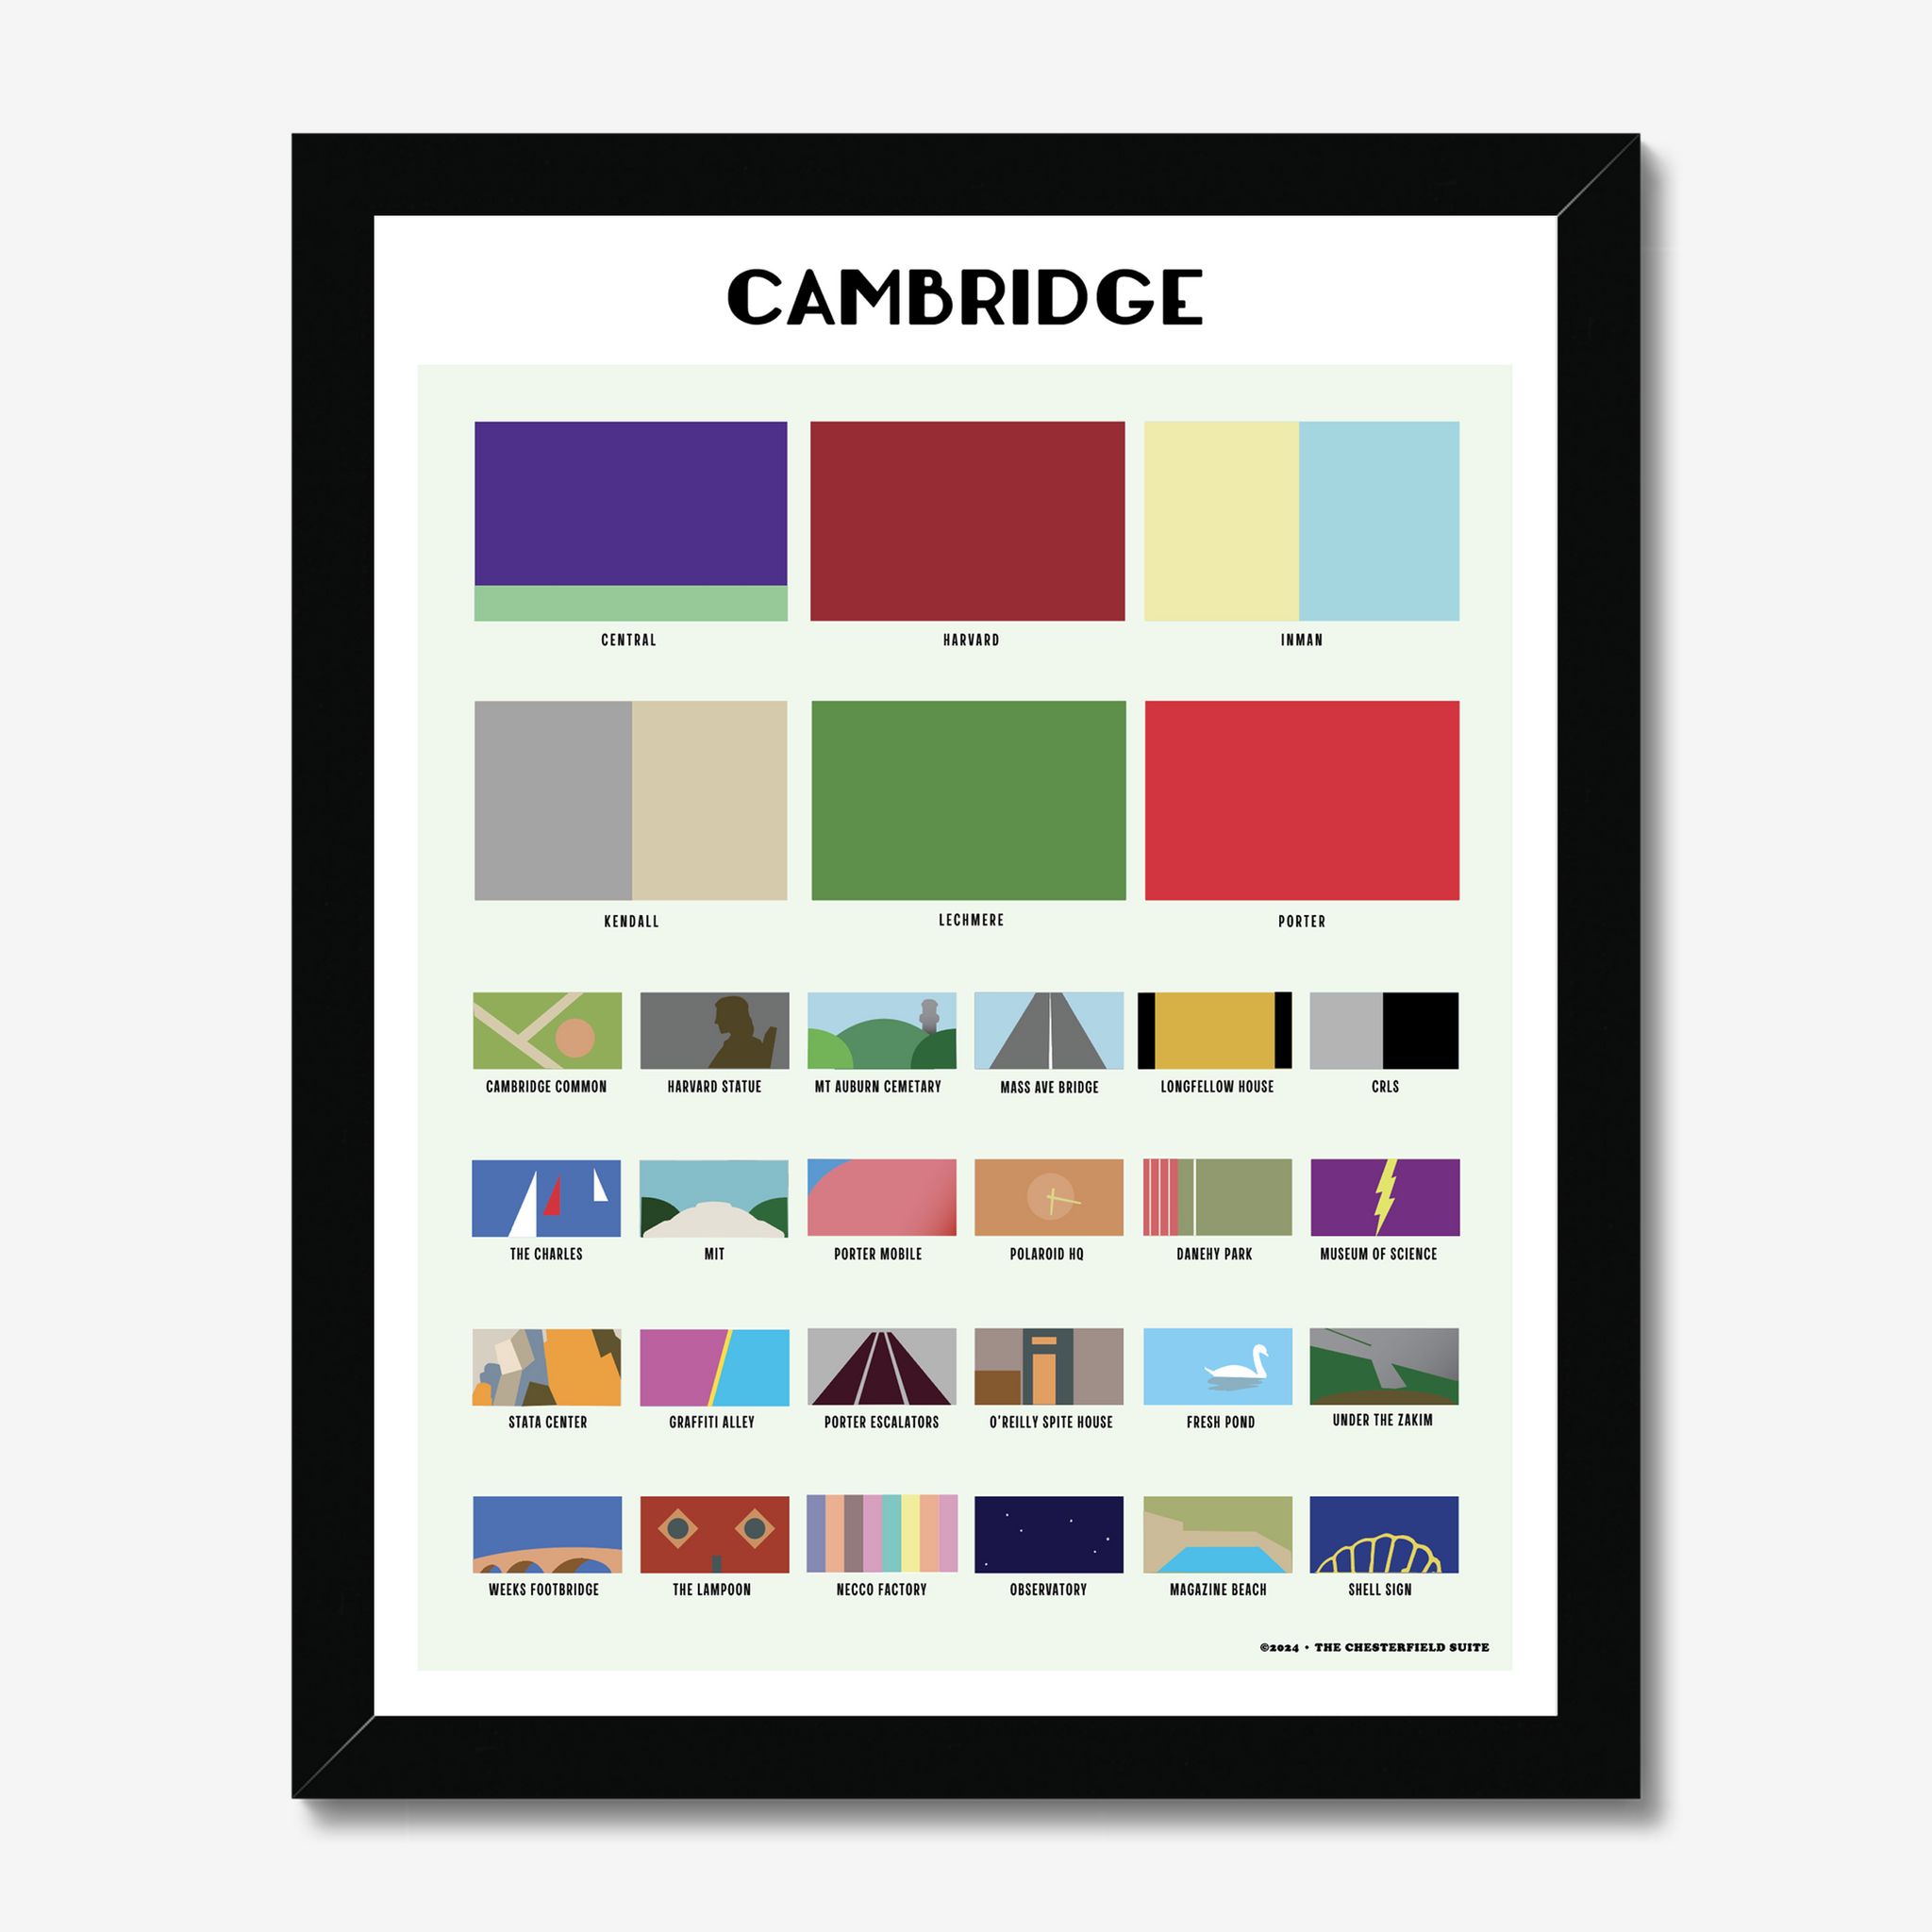 design of cambridge ma with blocks of color respresenting each neighborhood and attraction in a black frame